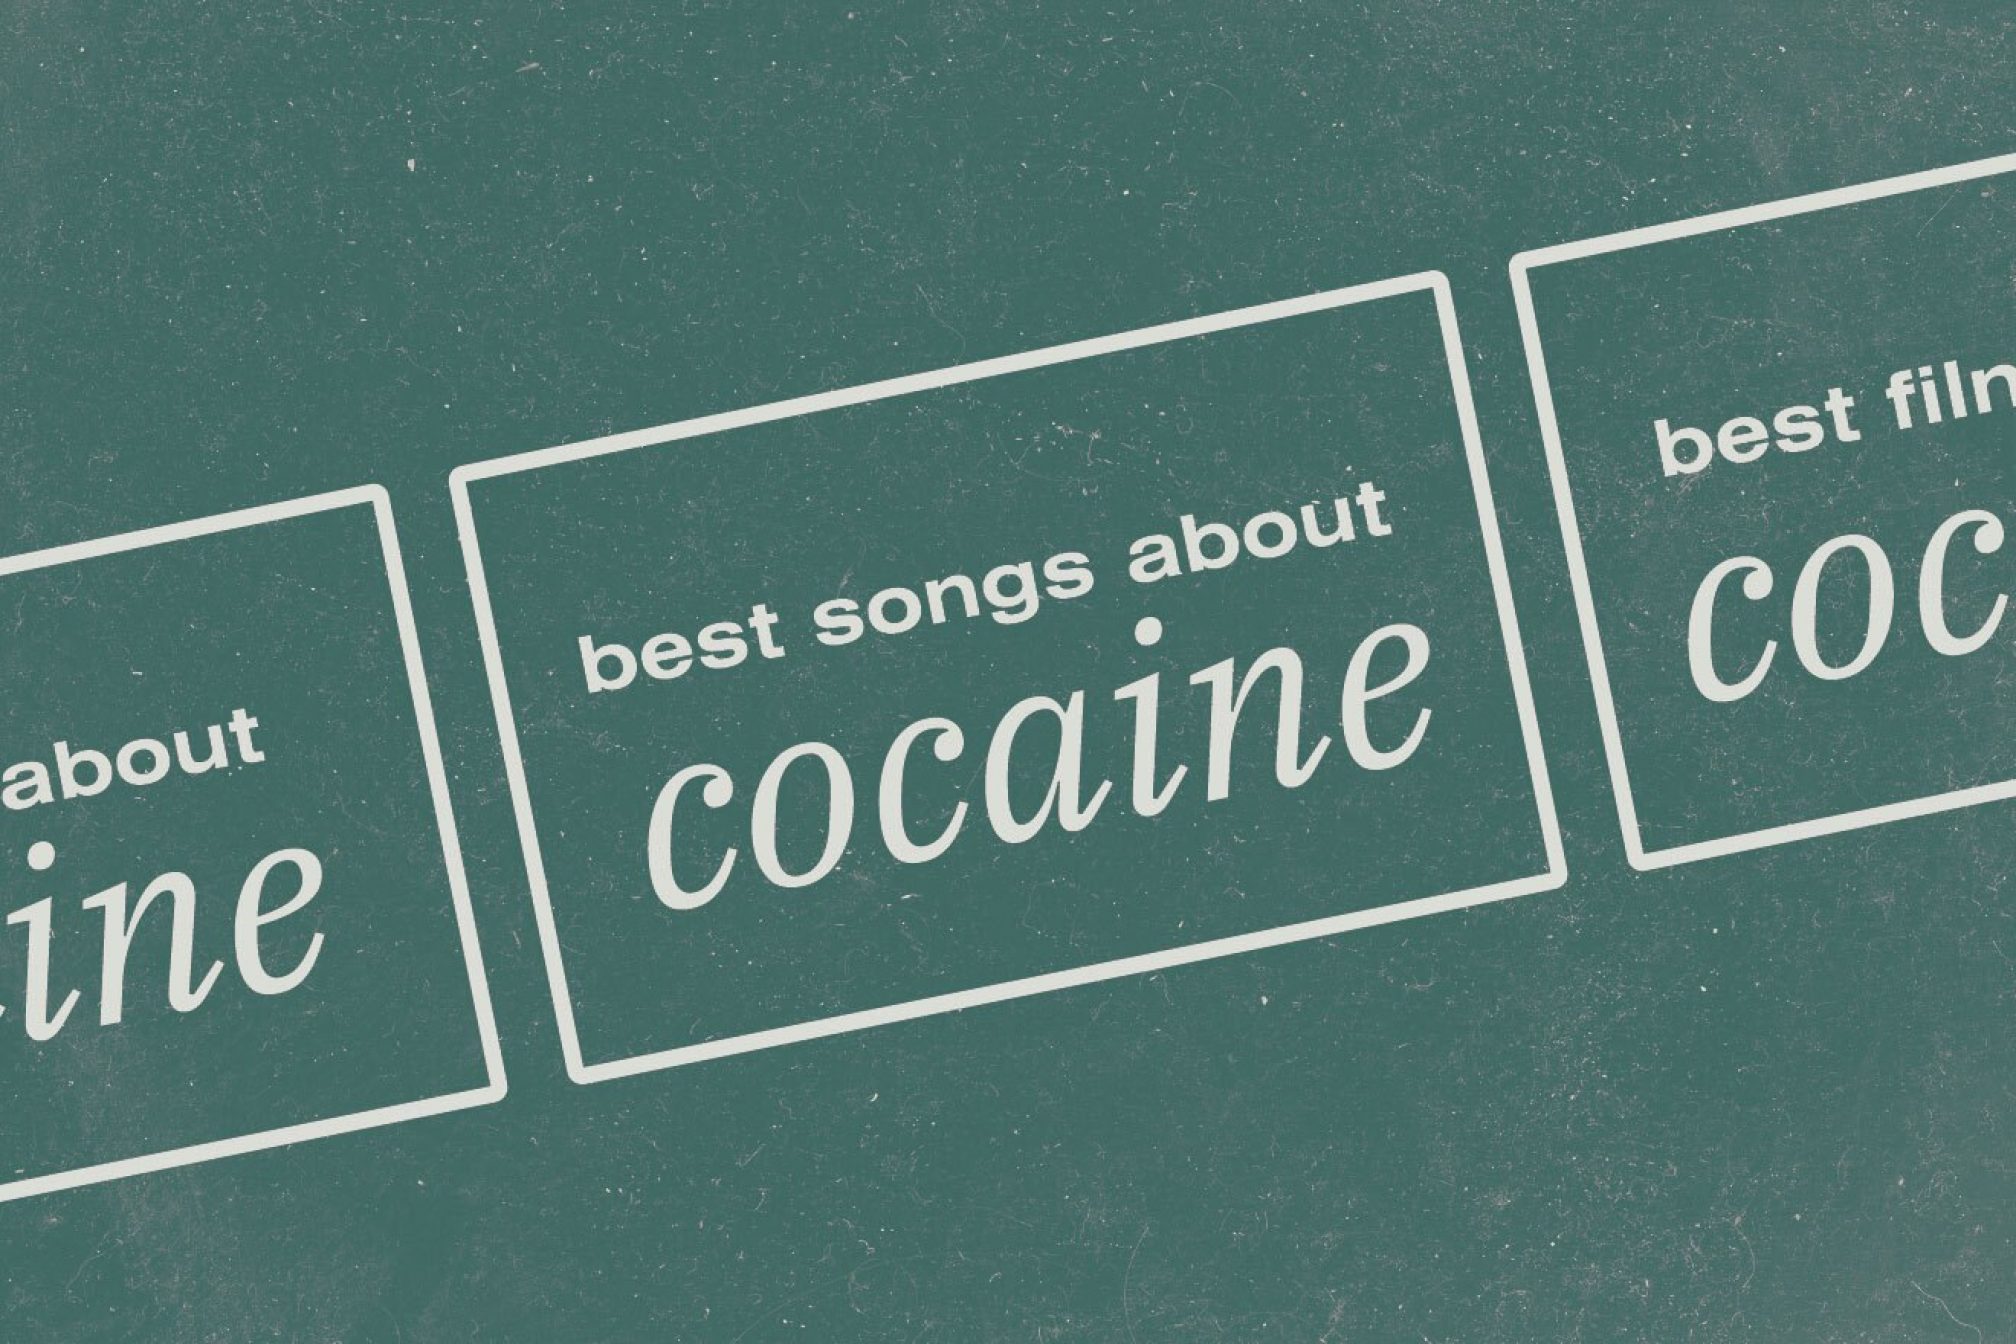 The 30 best songs about cocaine - Features - Mixmag